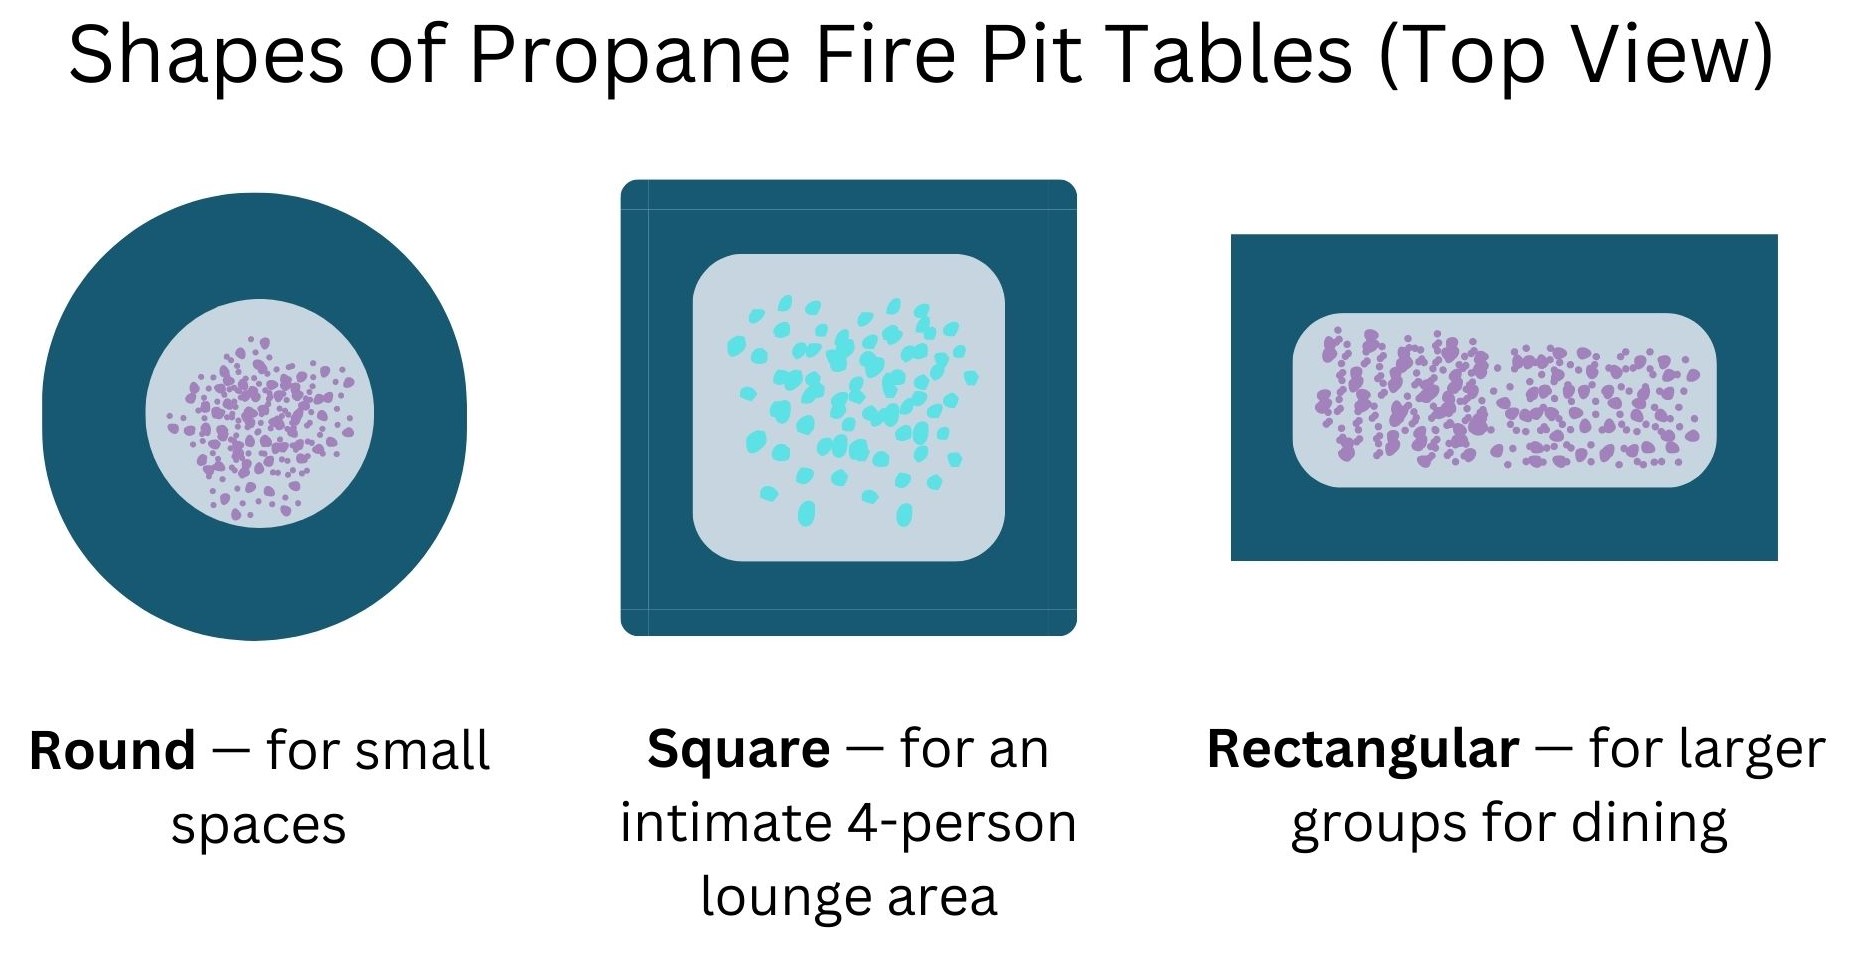 Shapes of propane fire pit tables